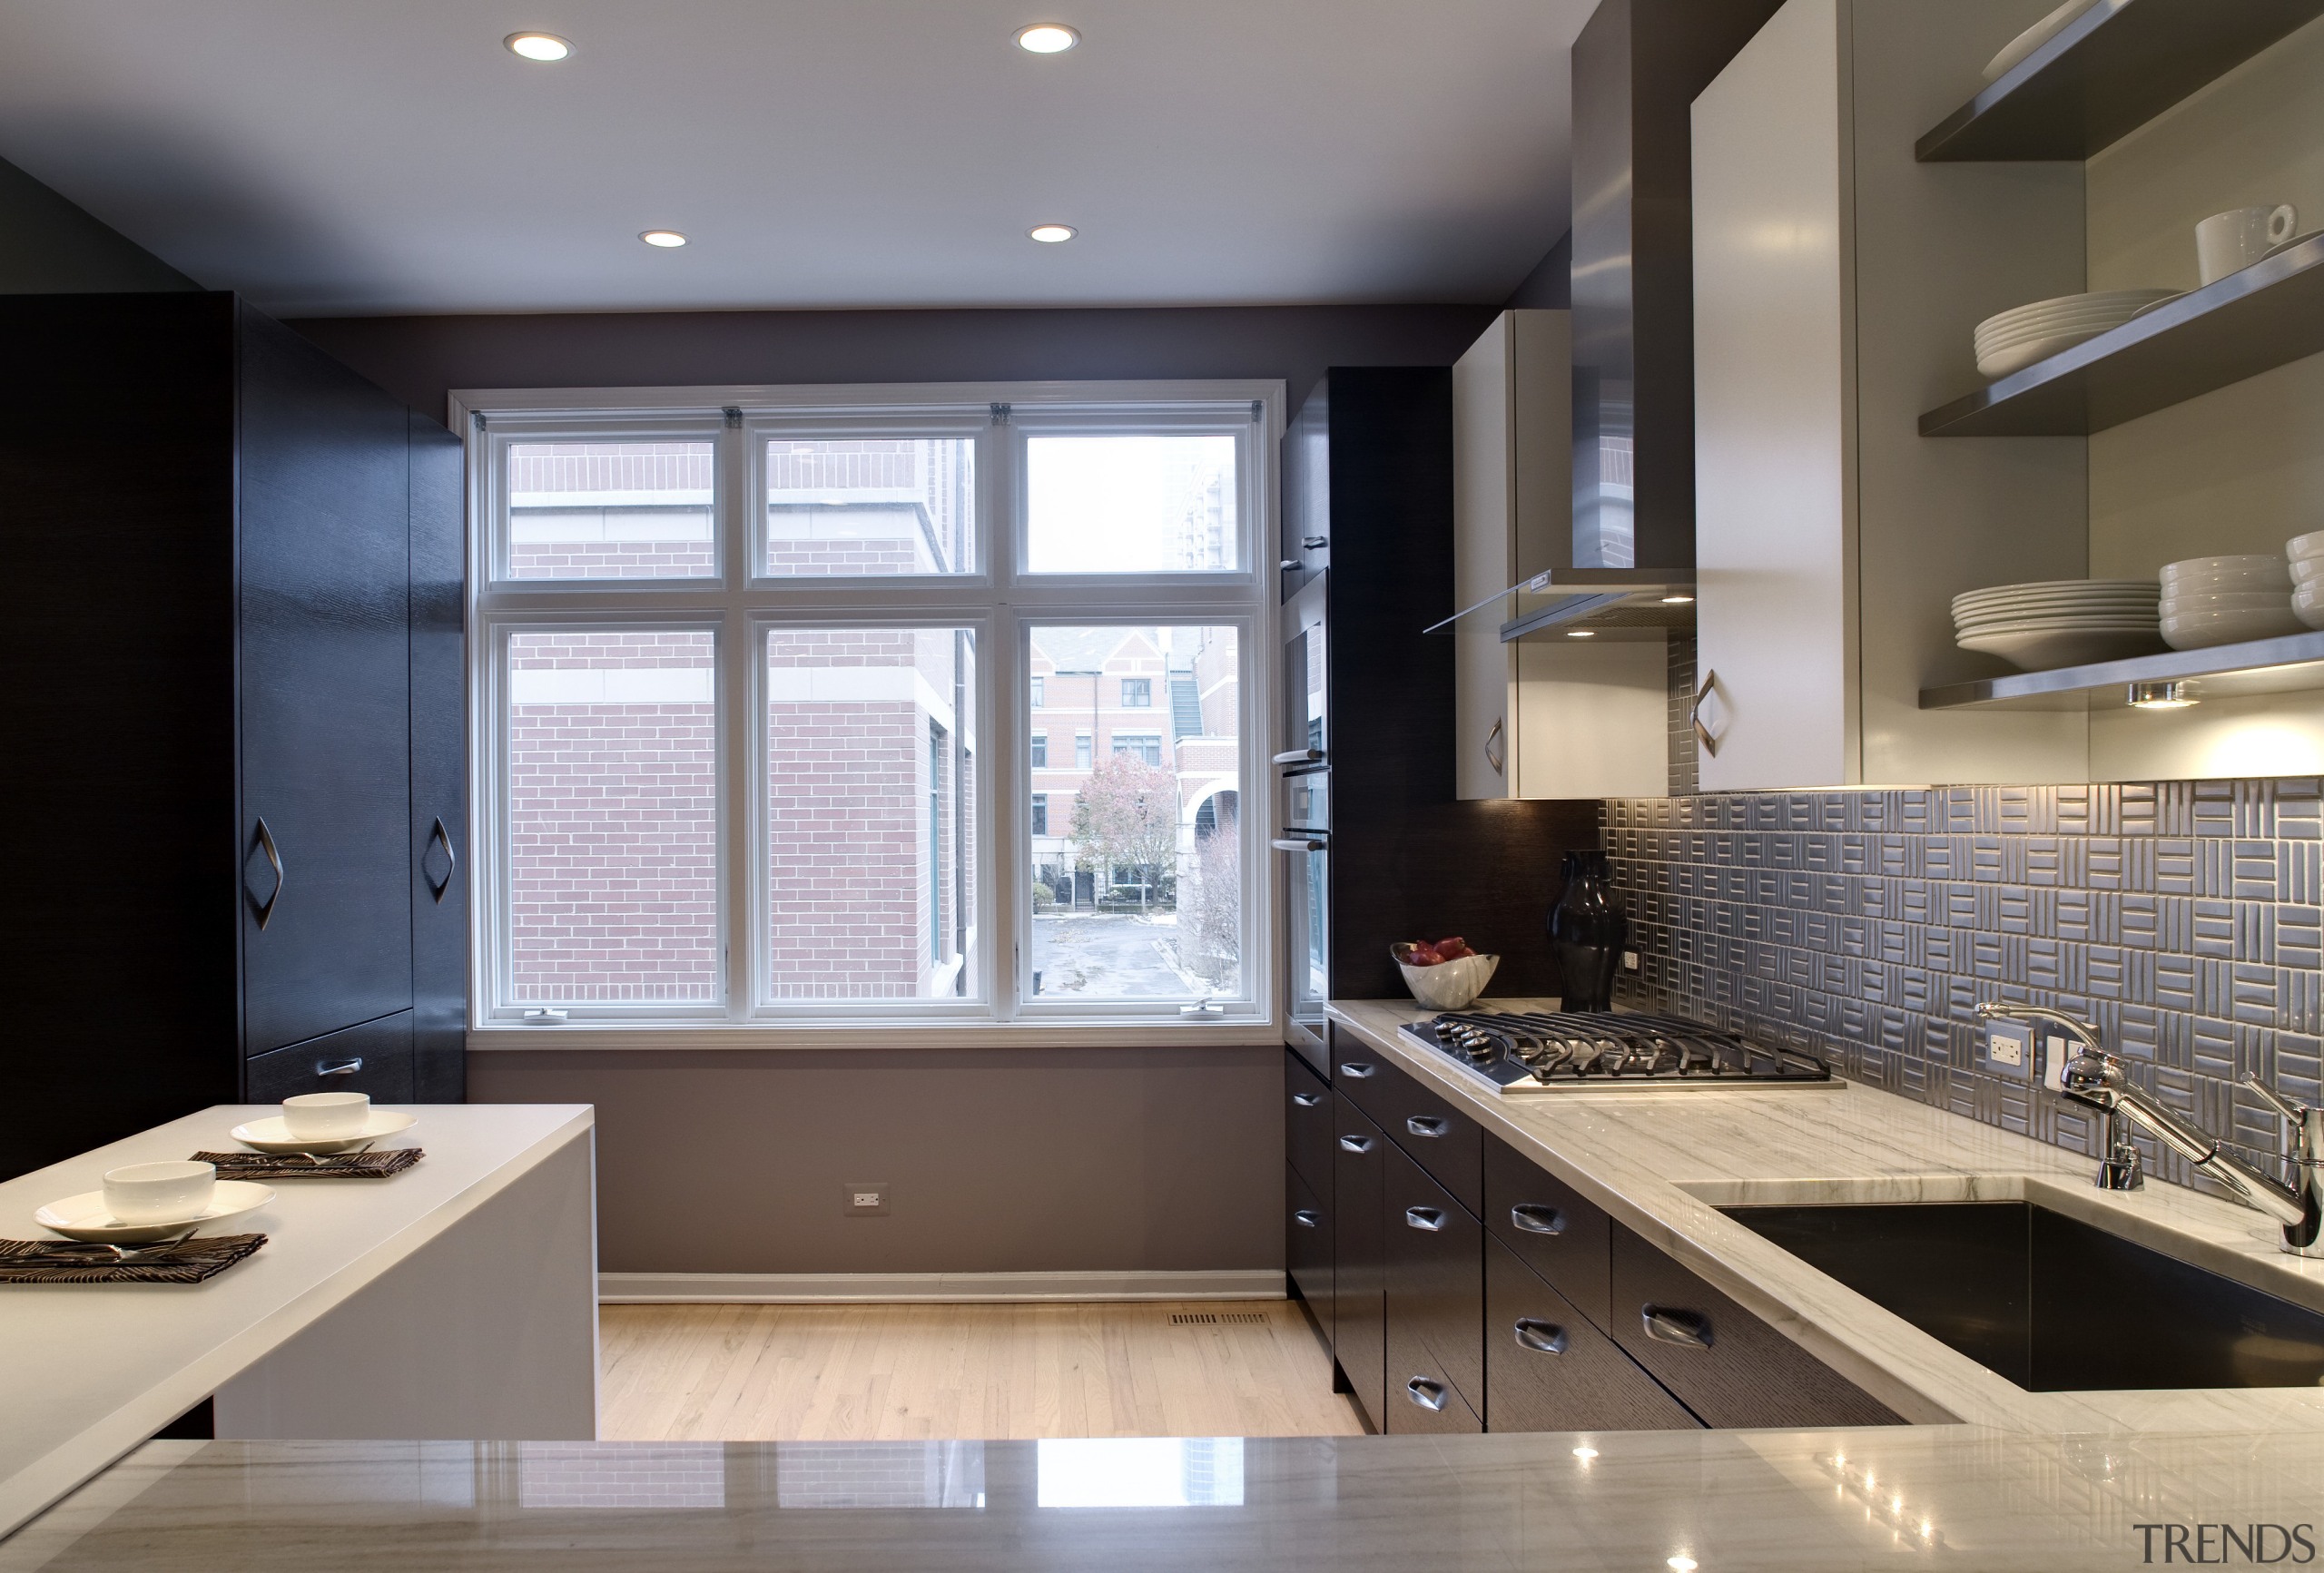 View of a remodelled kitchen which is adjacent cabinetry, countertop, daylighting, interior design, kitchen, room, gray